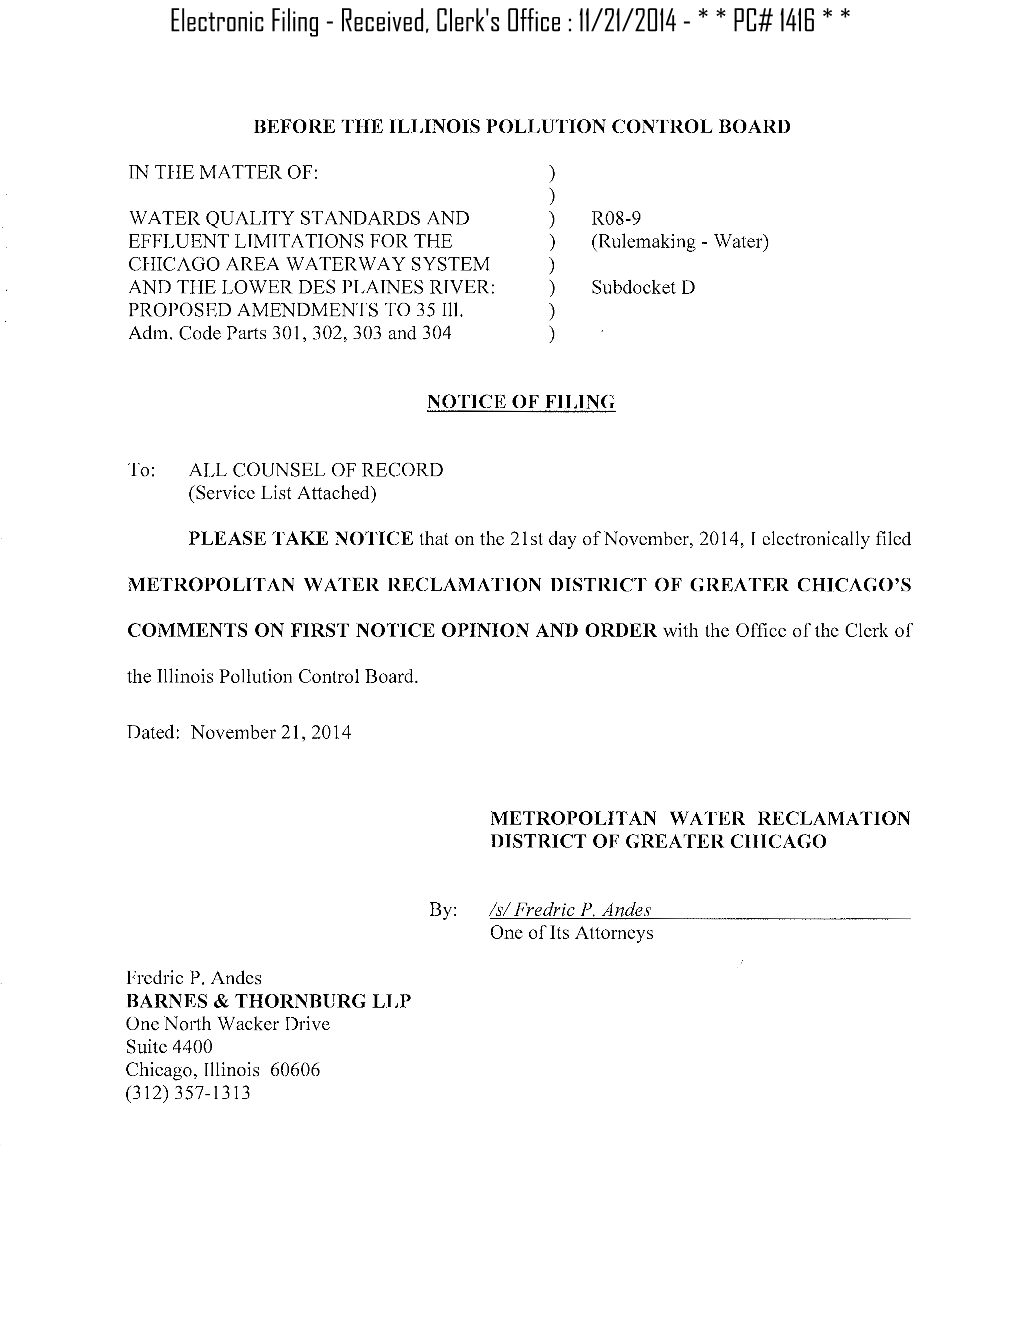 Electronic Filing - Received, Clerk's Office : 11/21/2014 - * * PC# 1416 * *